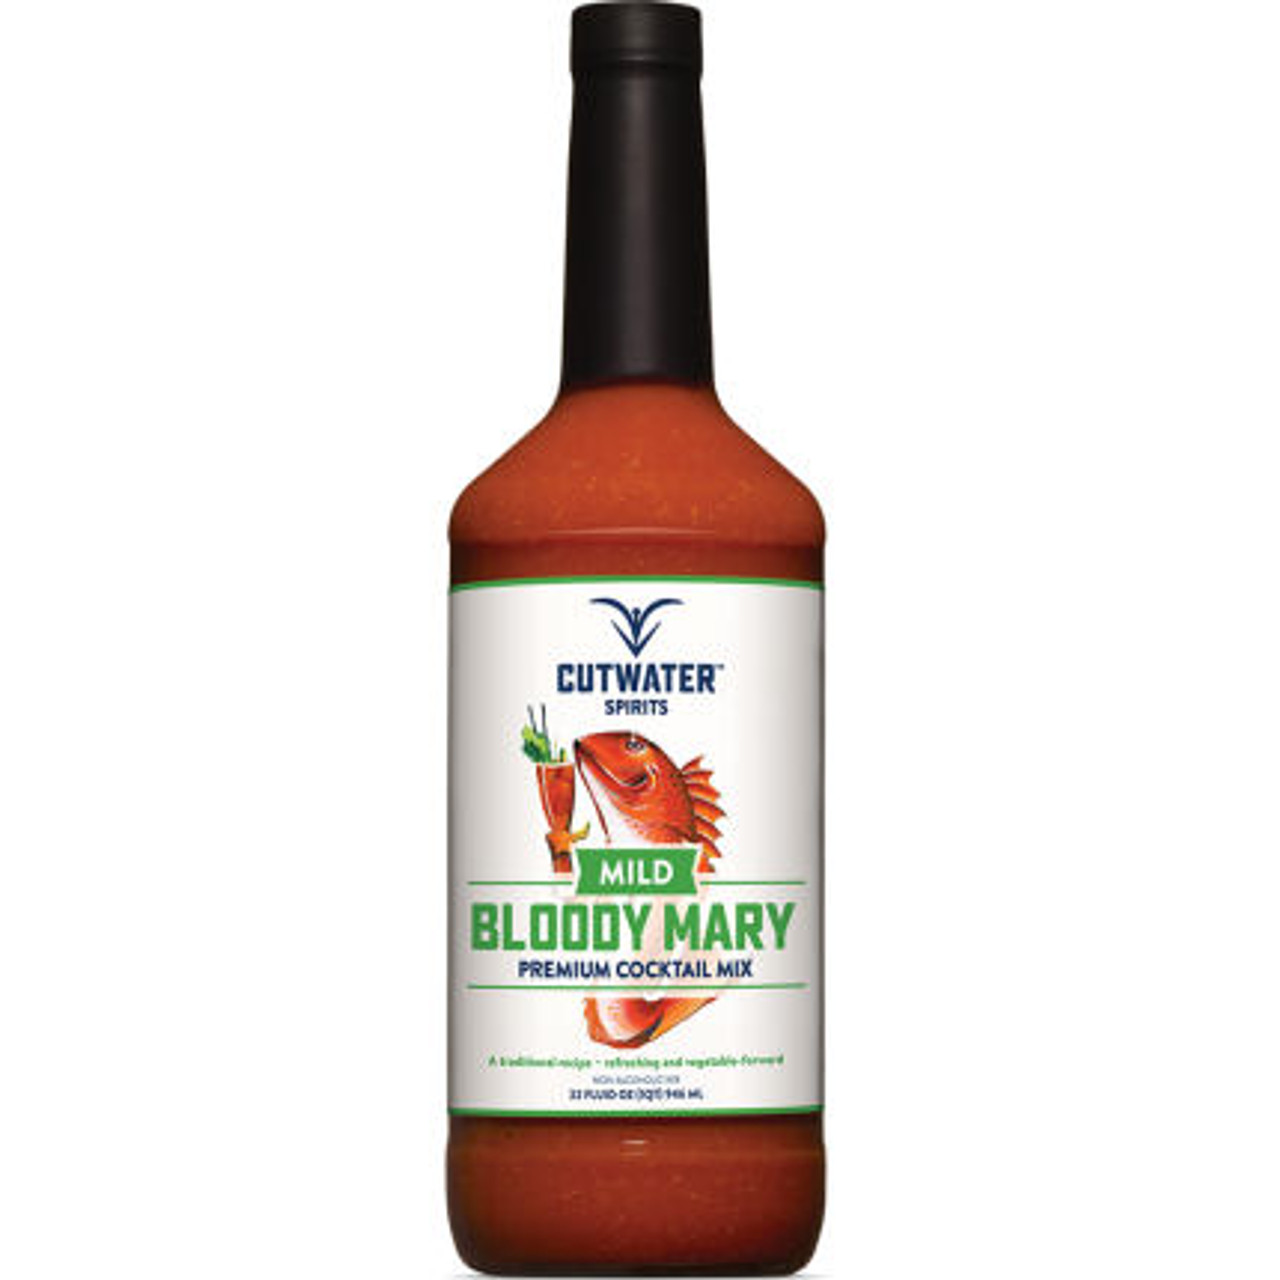 https://cdn11.bigcommerce.com/s-a04d0/images/stencil/1280x1280/products/11743/12499/cutwater-spirits-mild-bloody-mary-mix-32oz__92737.1661873733.jpg?c=2